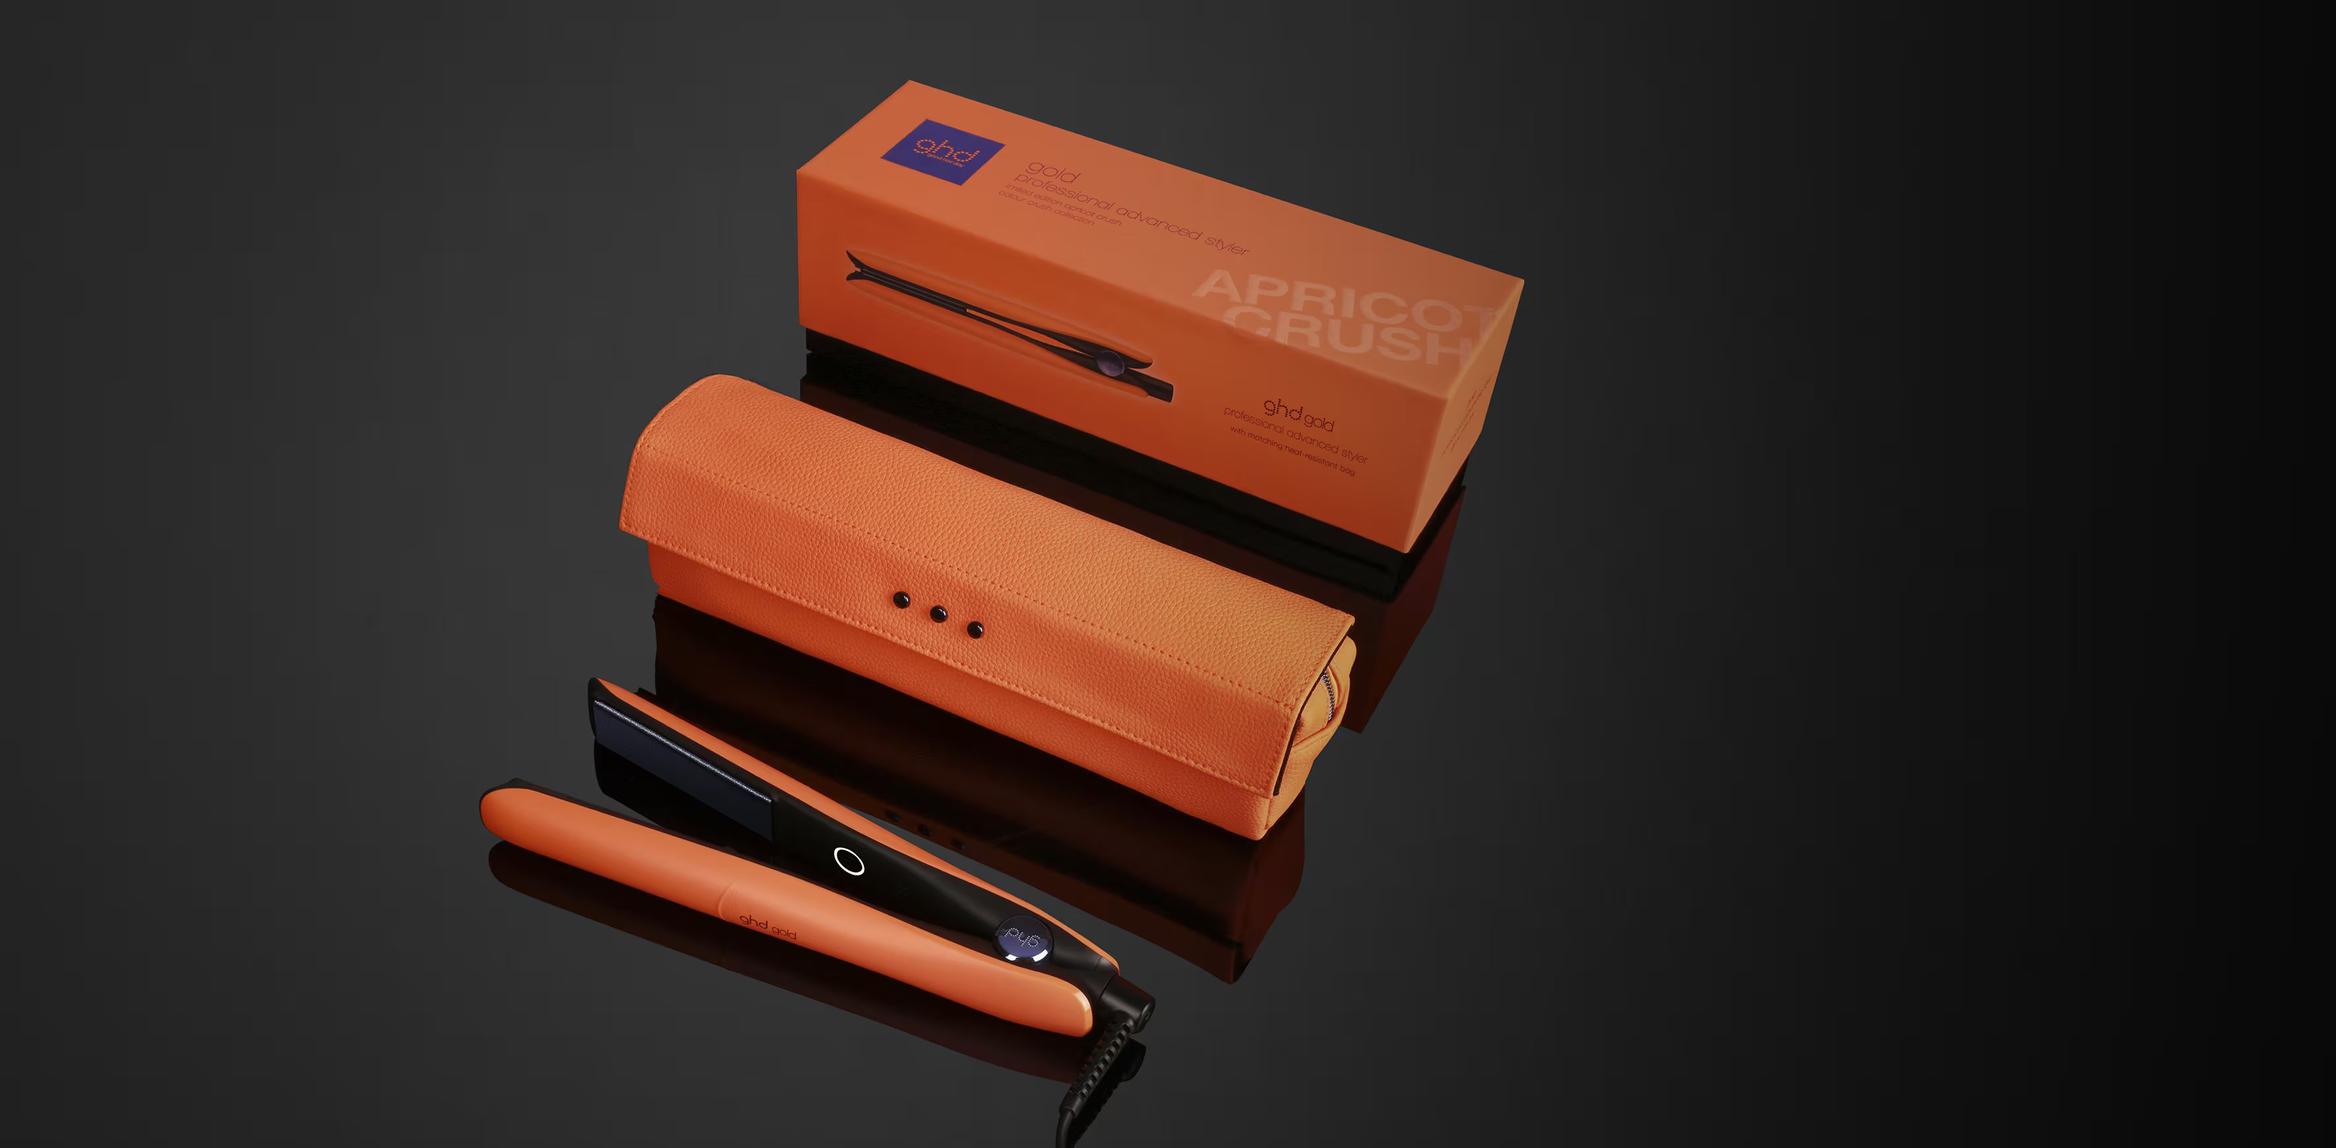 NEW GHD GOLD® HAIR STRAIGHTENER IN APRICOT CRUSH offers at $350 in ghd